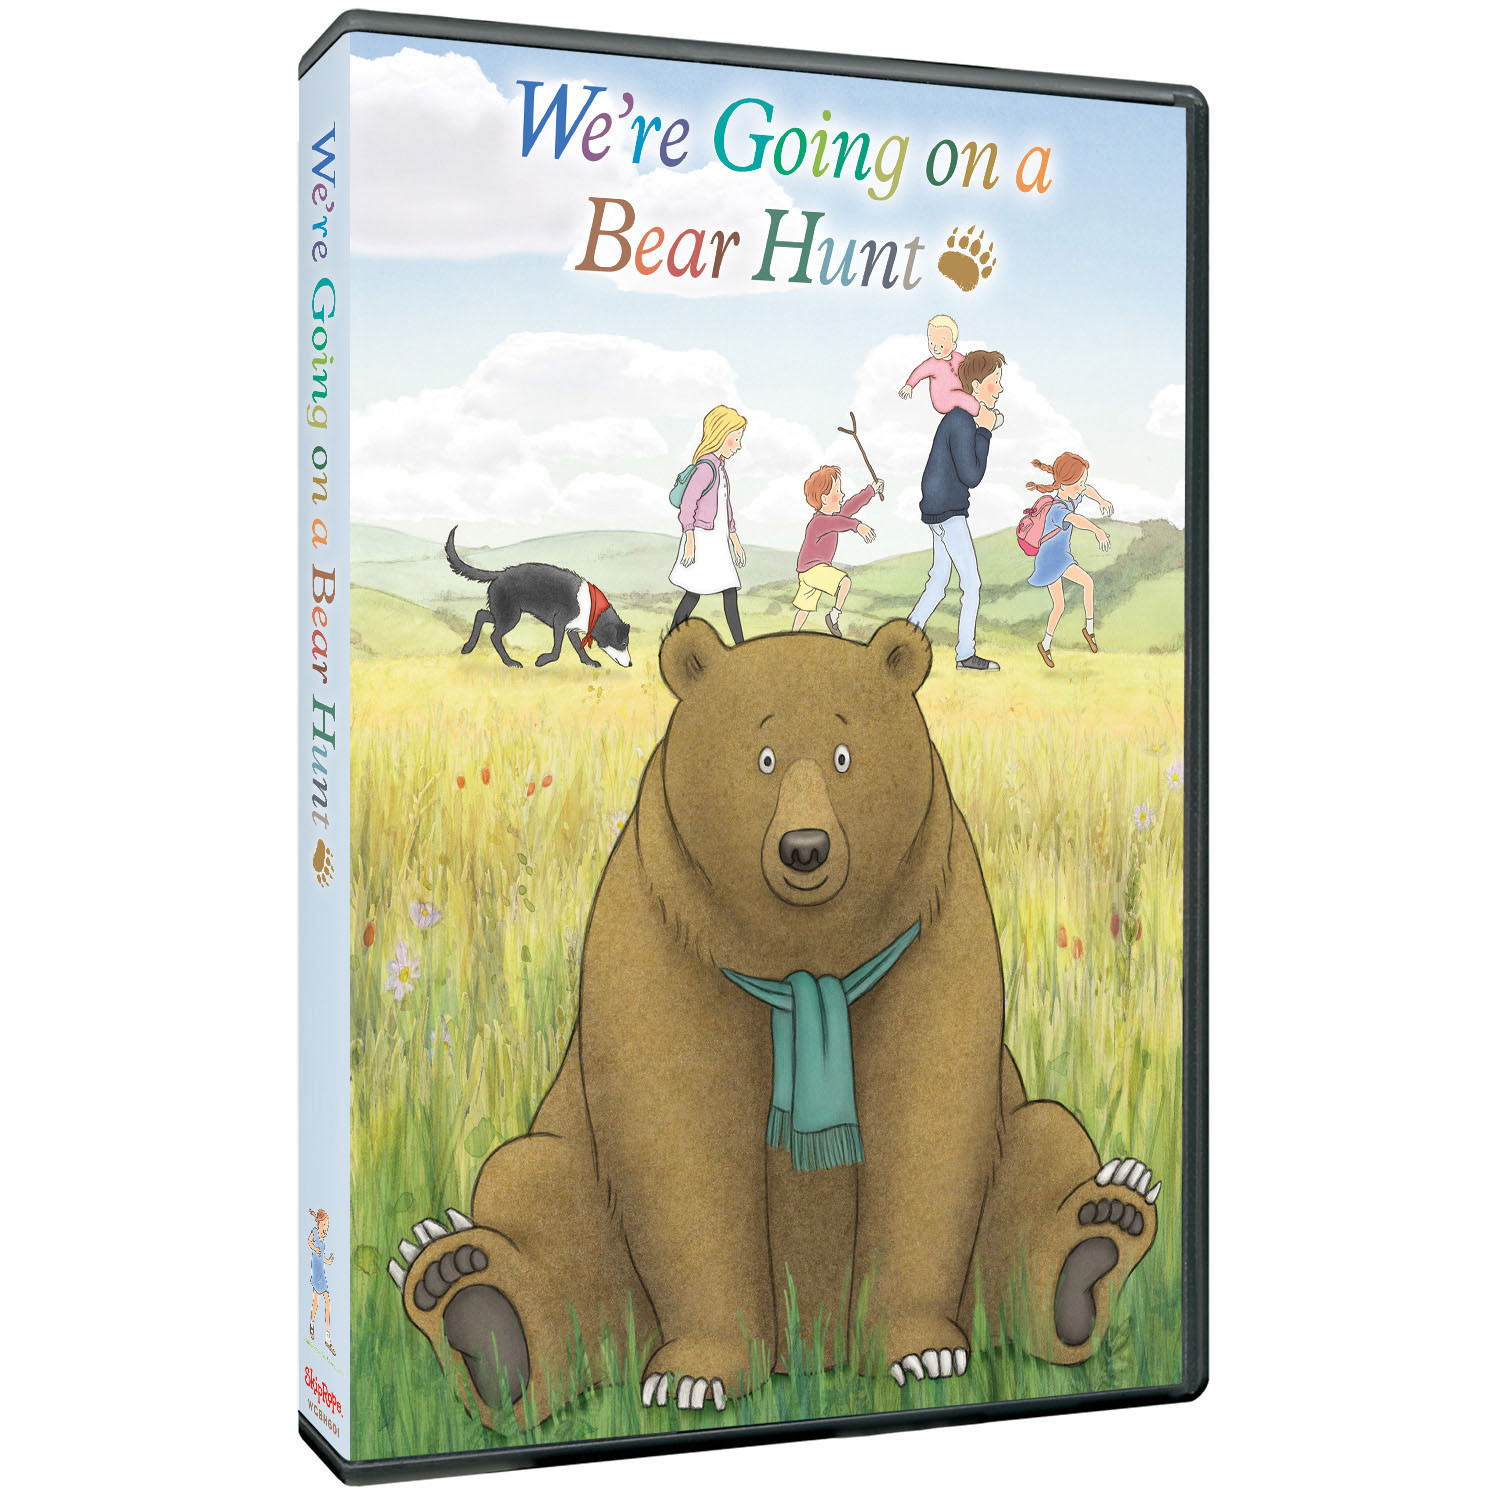 We're Going on a Bear Hunt DVD | Shop.PBS.org